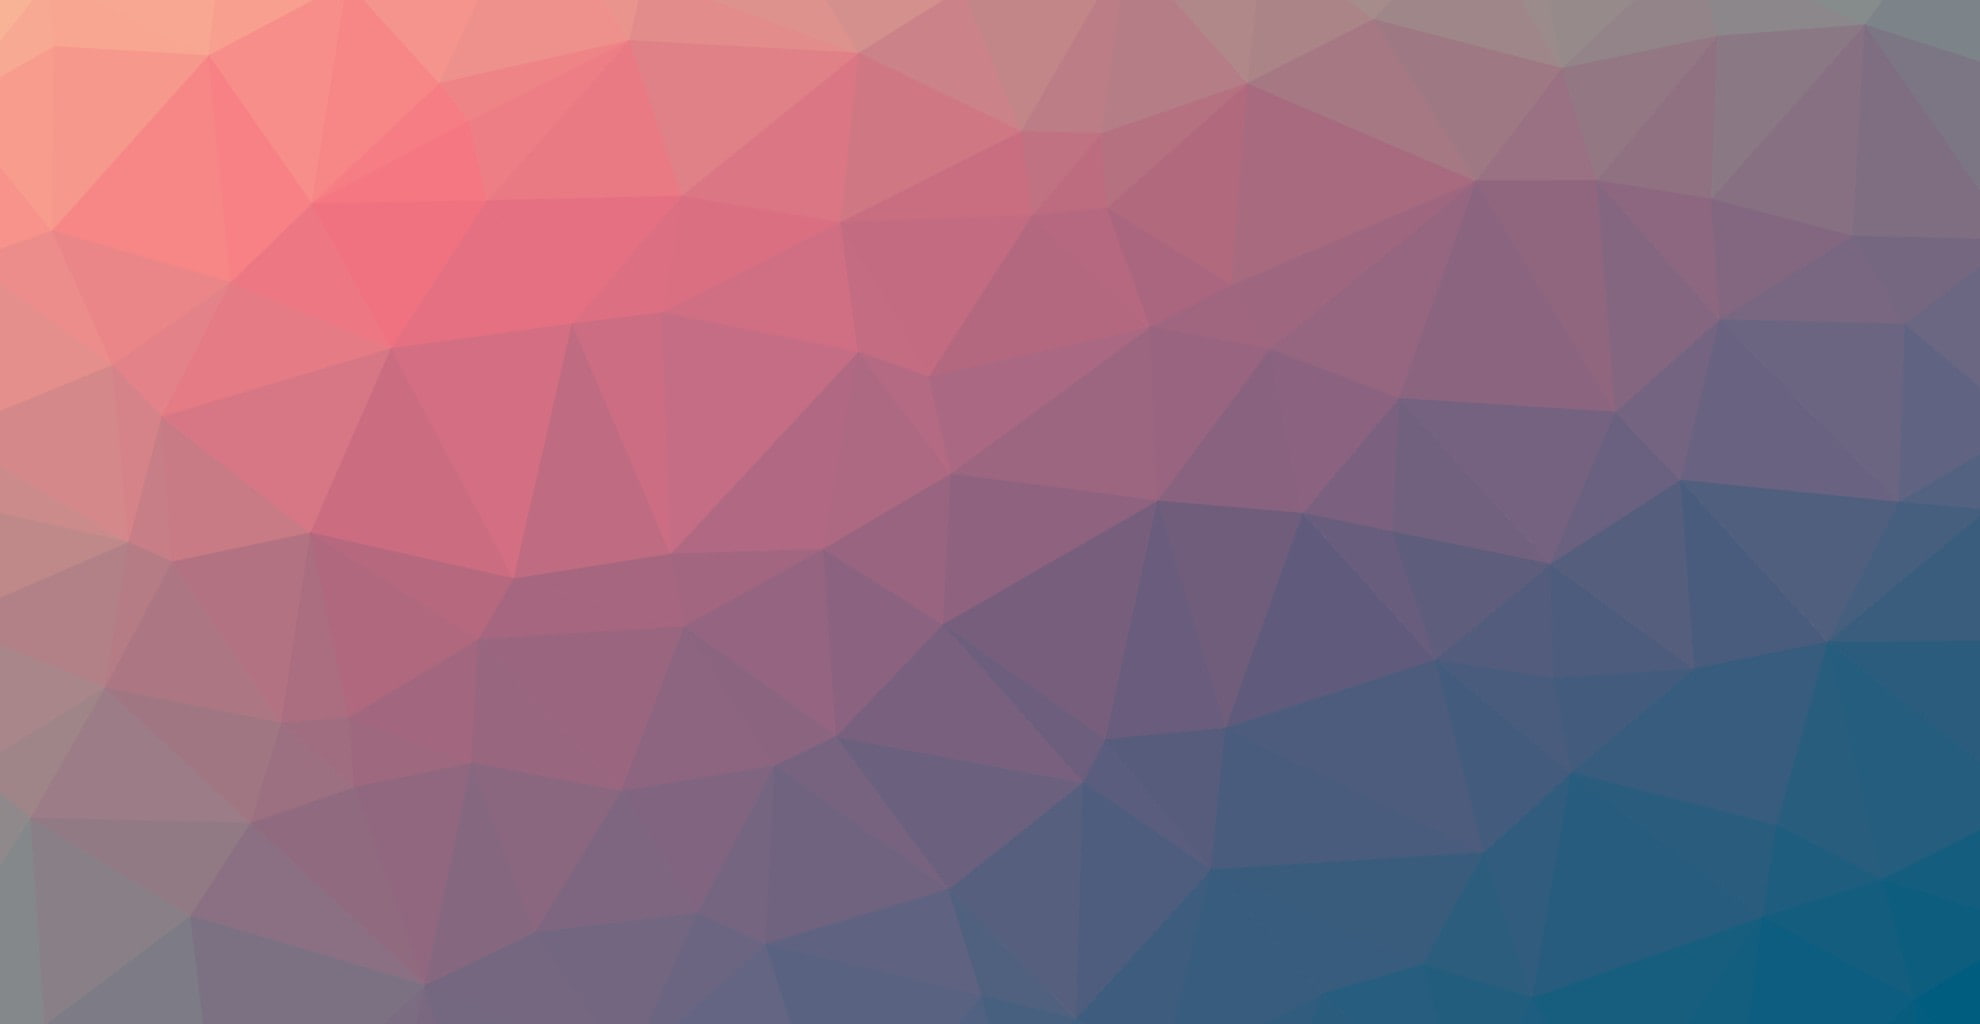 1980x1024 px abstract blue Gradient Linux Orange red Soft Gradient Triangle Violet People Celebrity HD Art